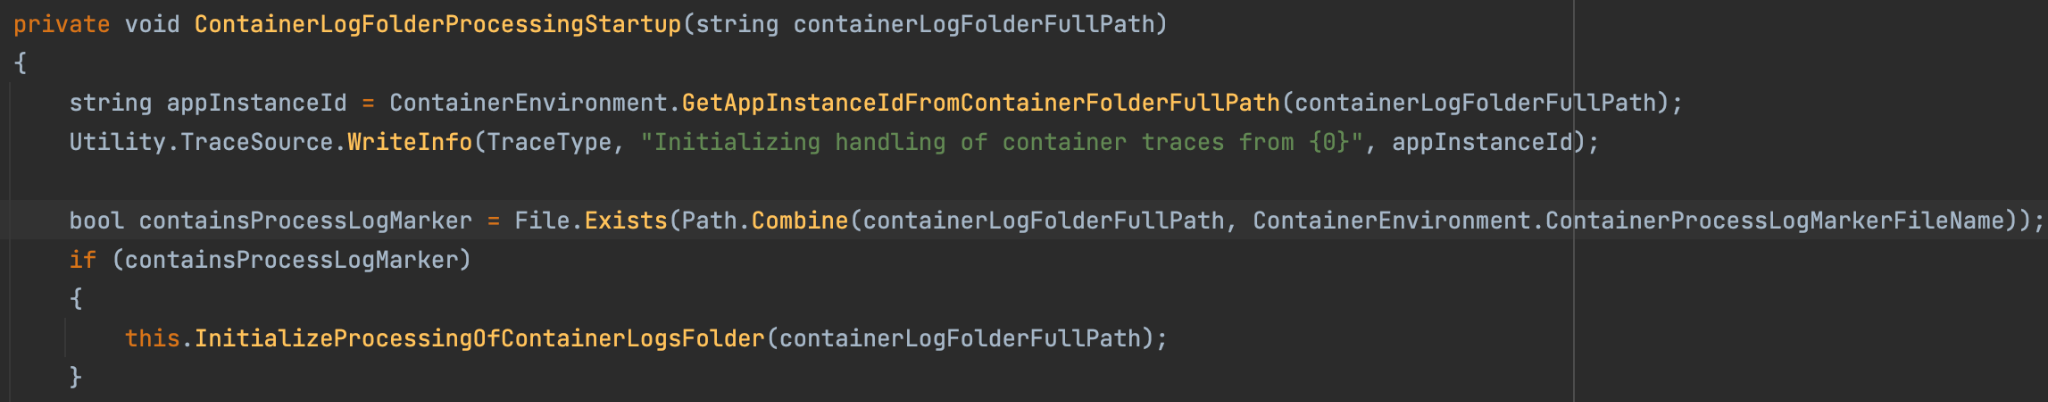 Code snippet begins with "private void ContainerLogFolderProcessingStartup(string containerLogFolderFullPath)"